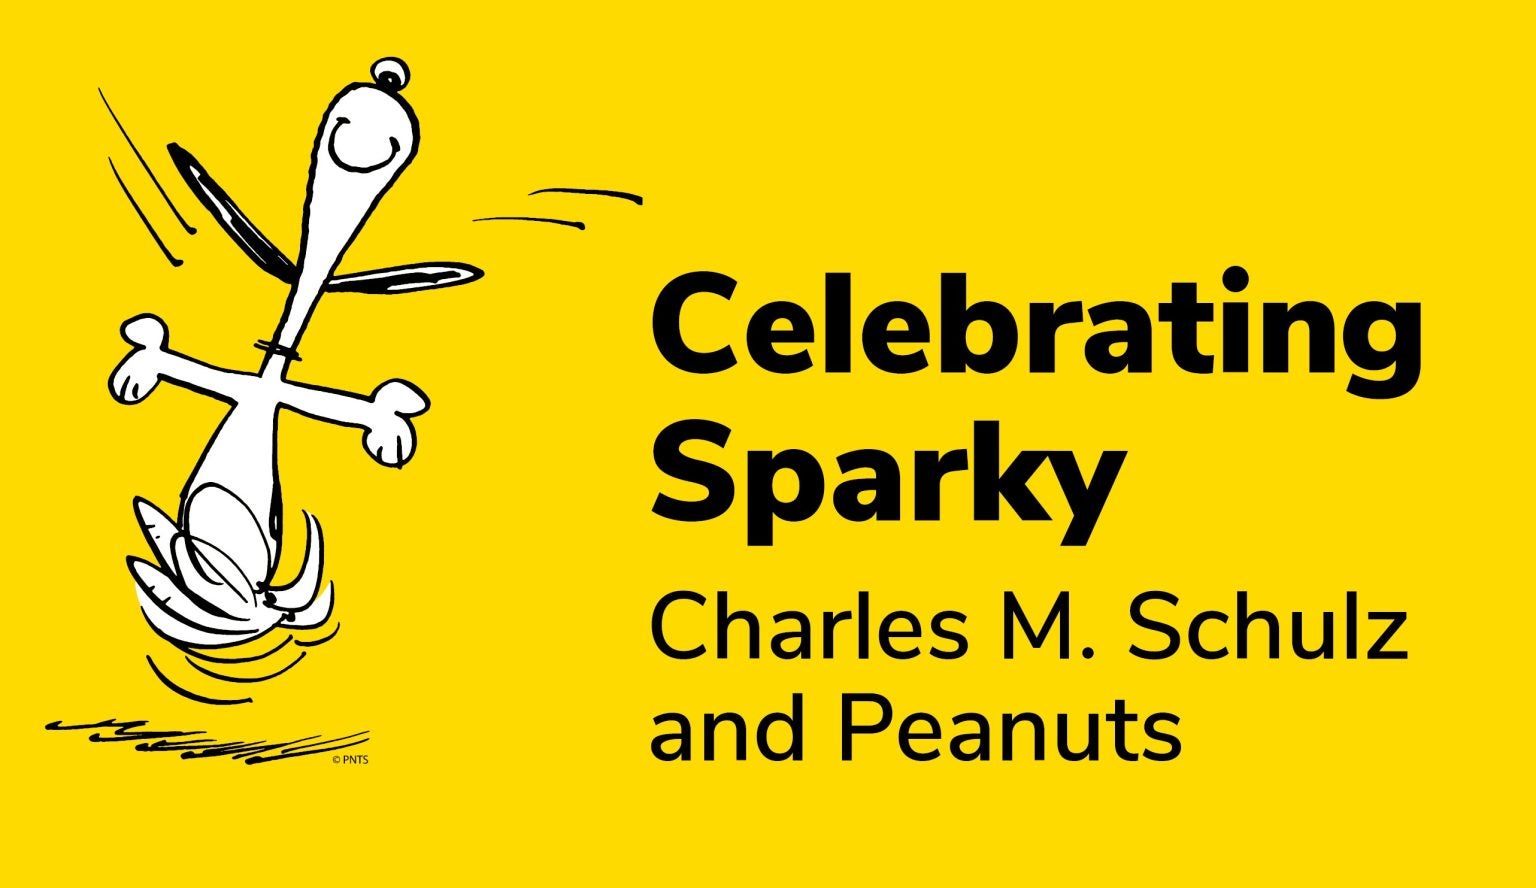 Celebrating Peanuts creator Charles 'Sparky' Schulz at the Billy Ireland  Cartoon Library & Museum | Popverse